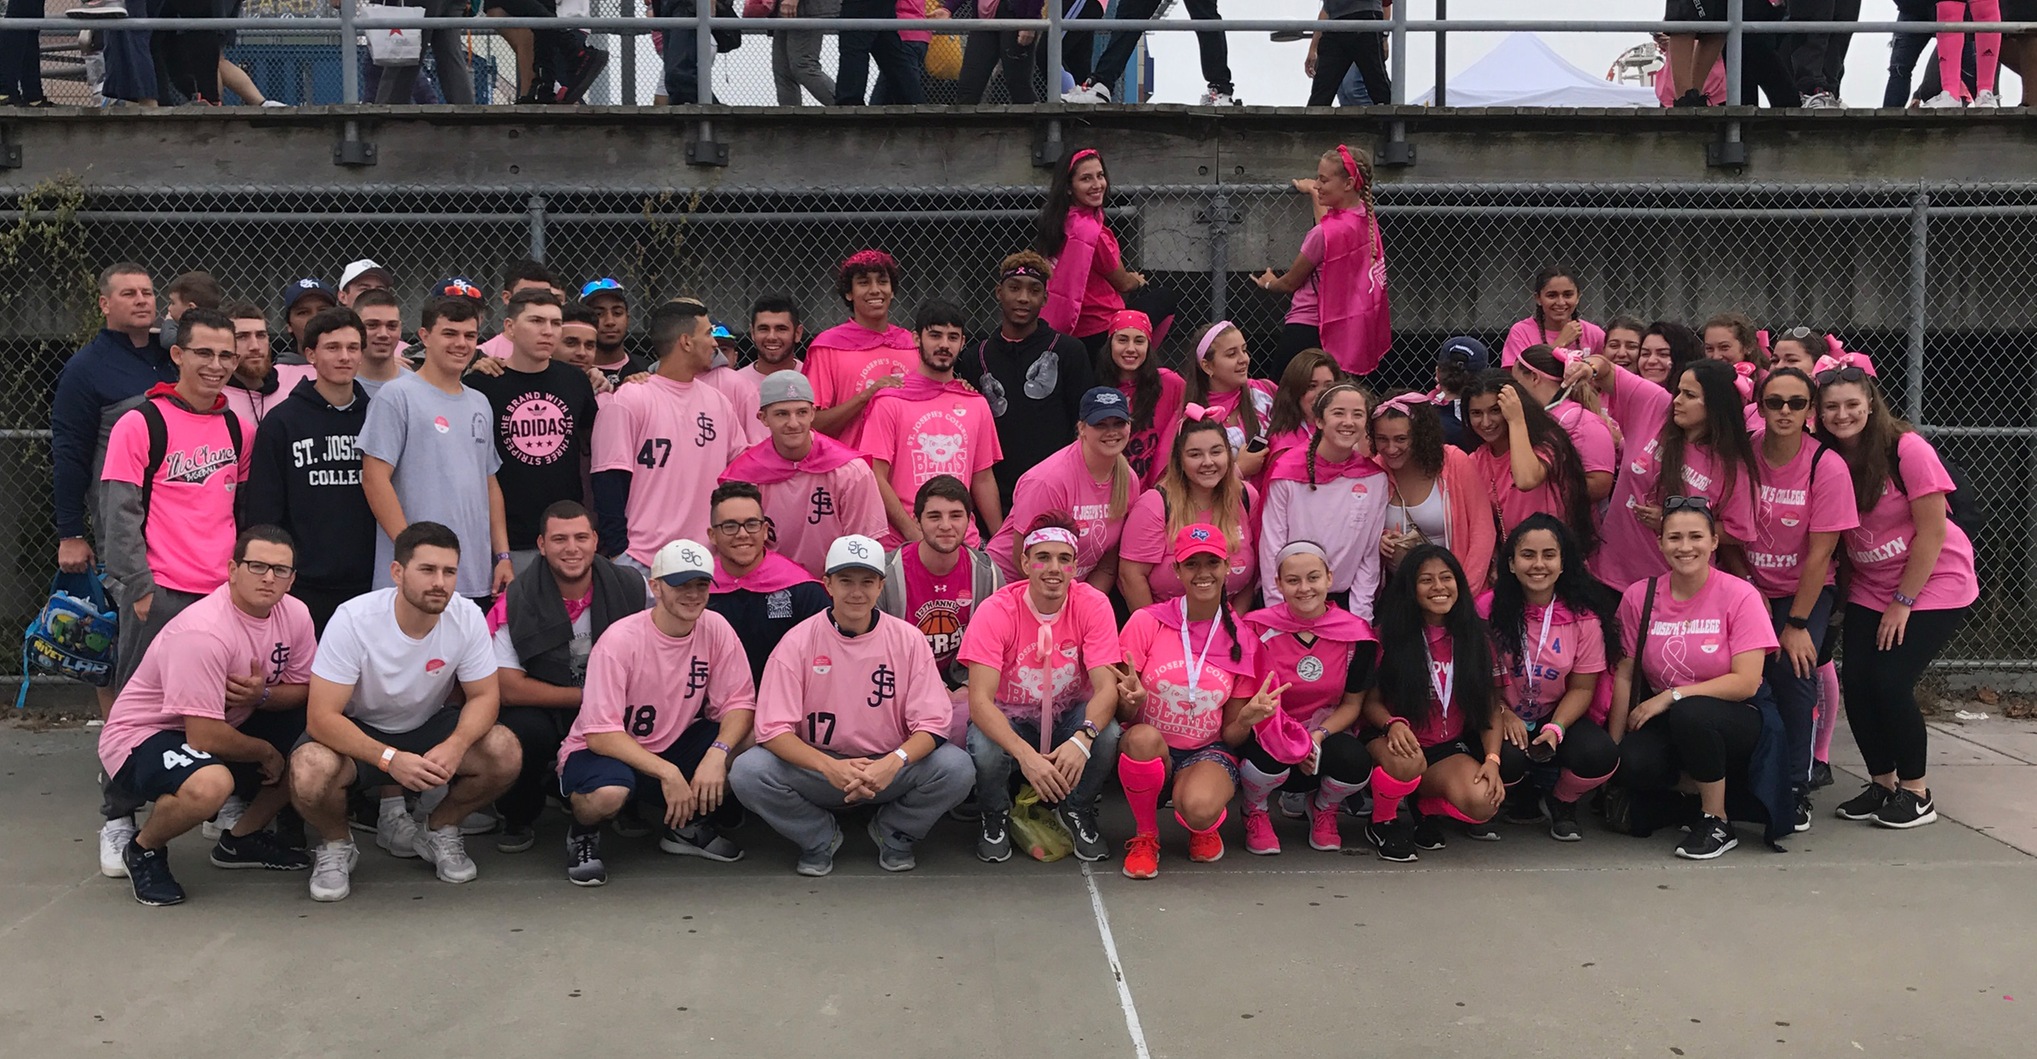 Bears Make Strides For Breast Cancer Research and Prevention